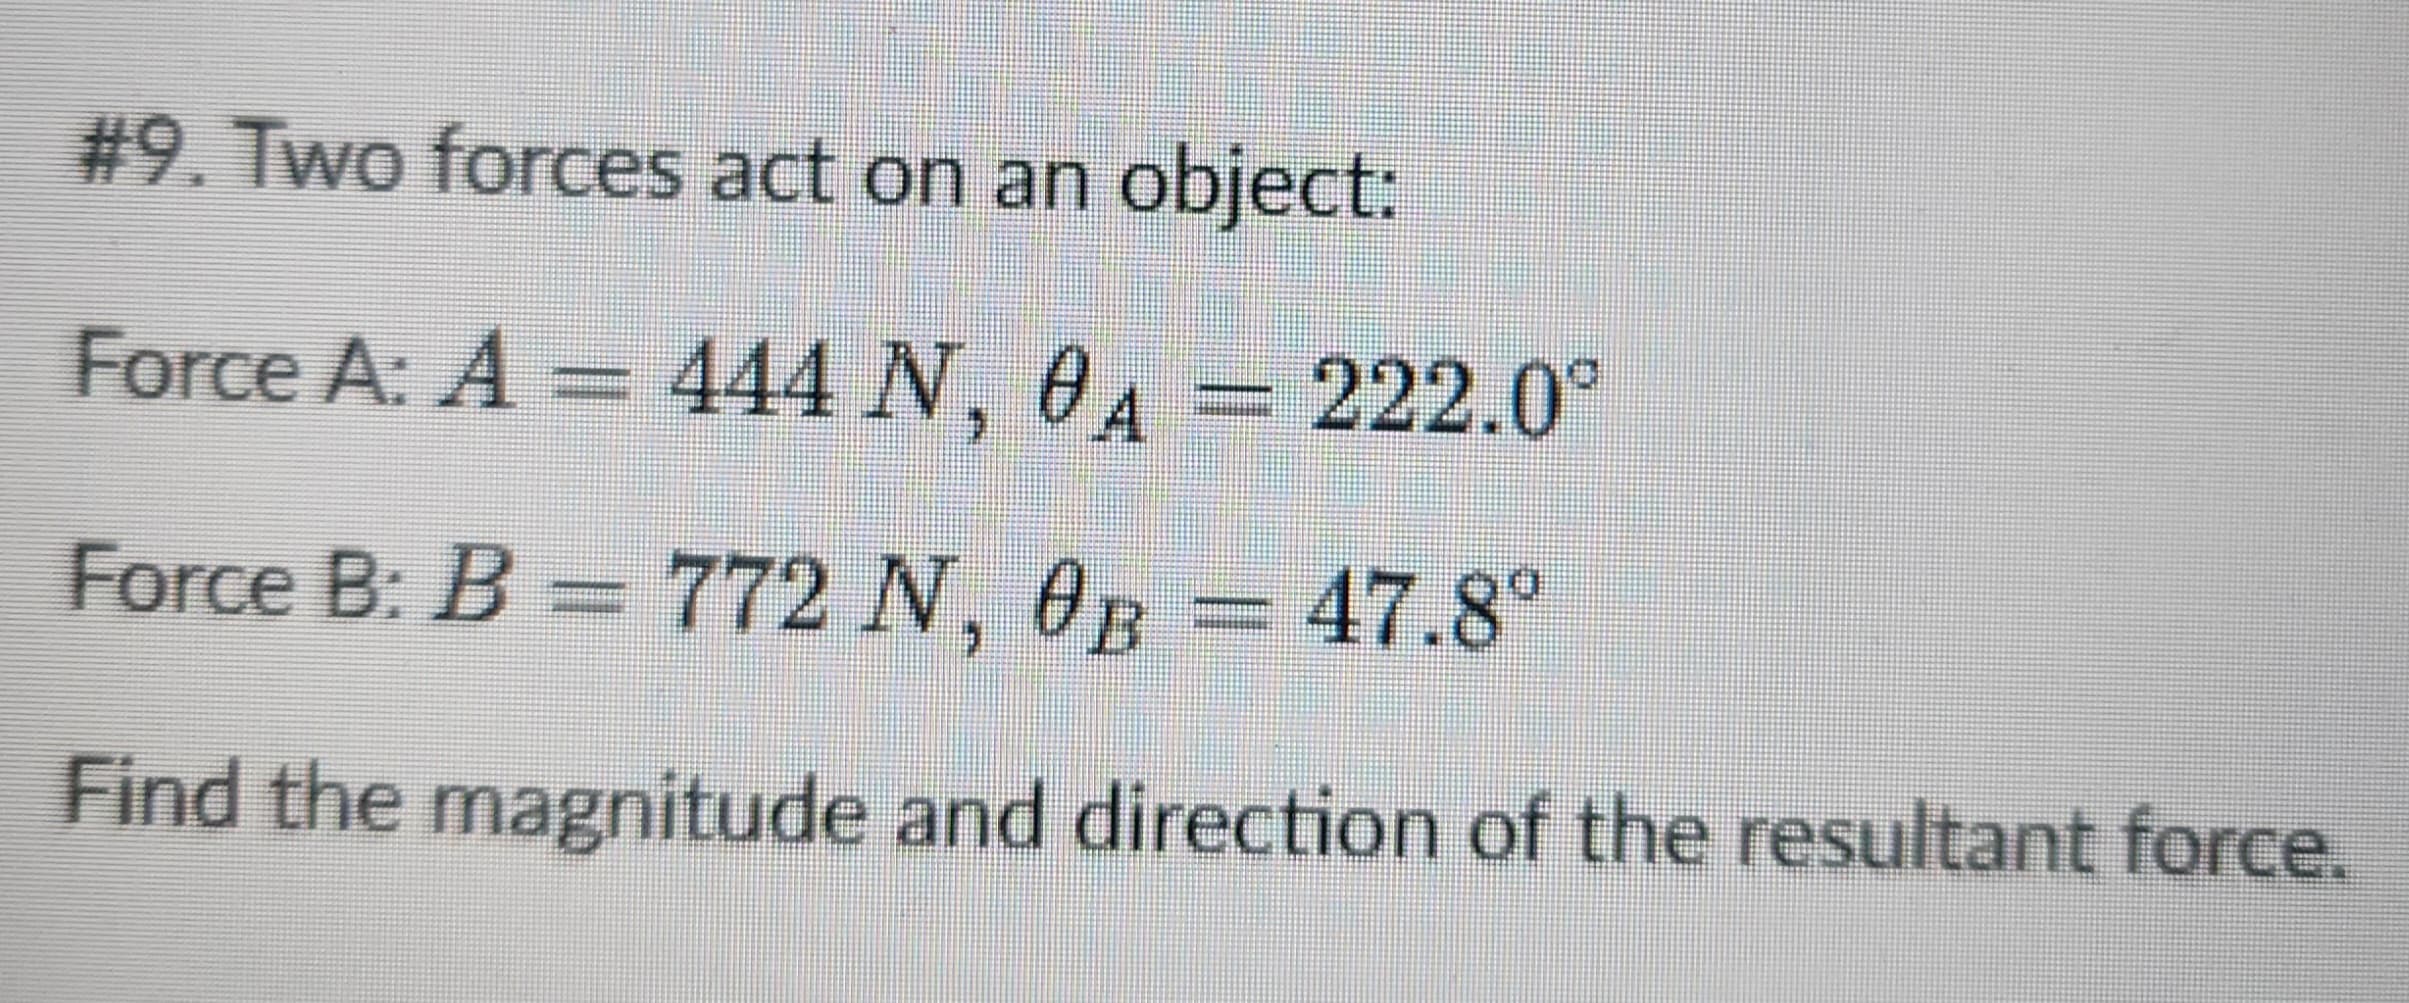 #9. Two forces act on an object:
Force A: A = 444 N, 0A
222.0°
Force B: B = 772 N, 0B = 47.8°
Find the magnitude and direction of the resultant force.